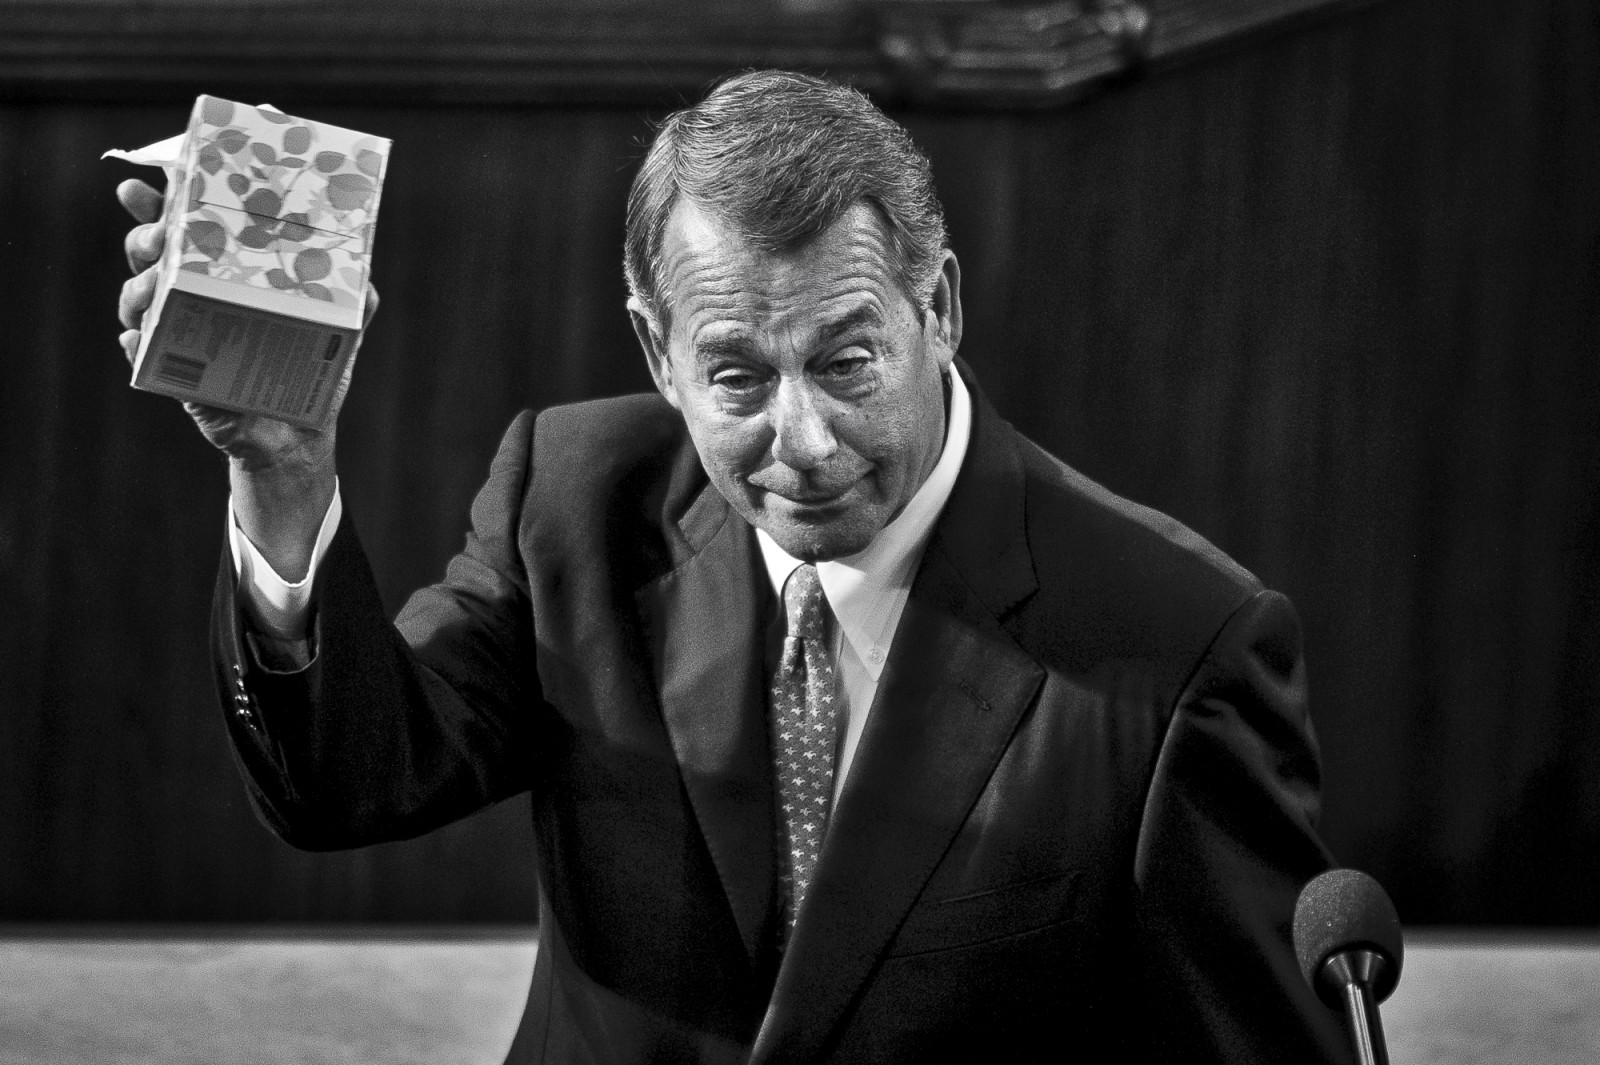 Speaker of the House John Boehner (R-OH) shows off his box of tissue as he prepares to deliver his farewell address to the House of Representatives on October 29, 2015 in Washington, D.C. Following his address, the House of Representatives will vote on Boehner’s replacement for Speaker. Photo by Pete Marovich/UPI